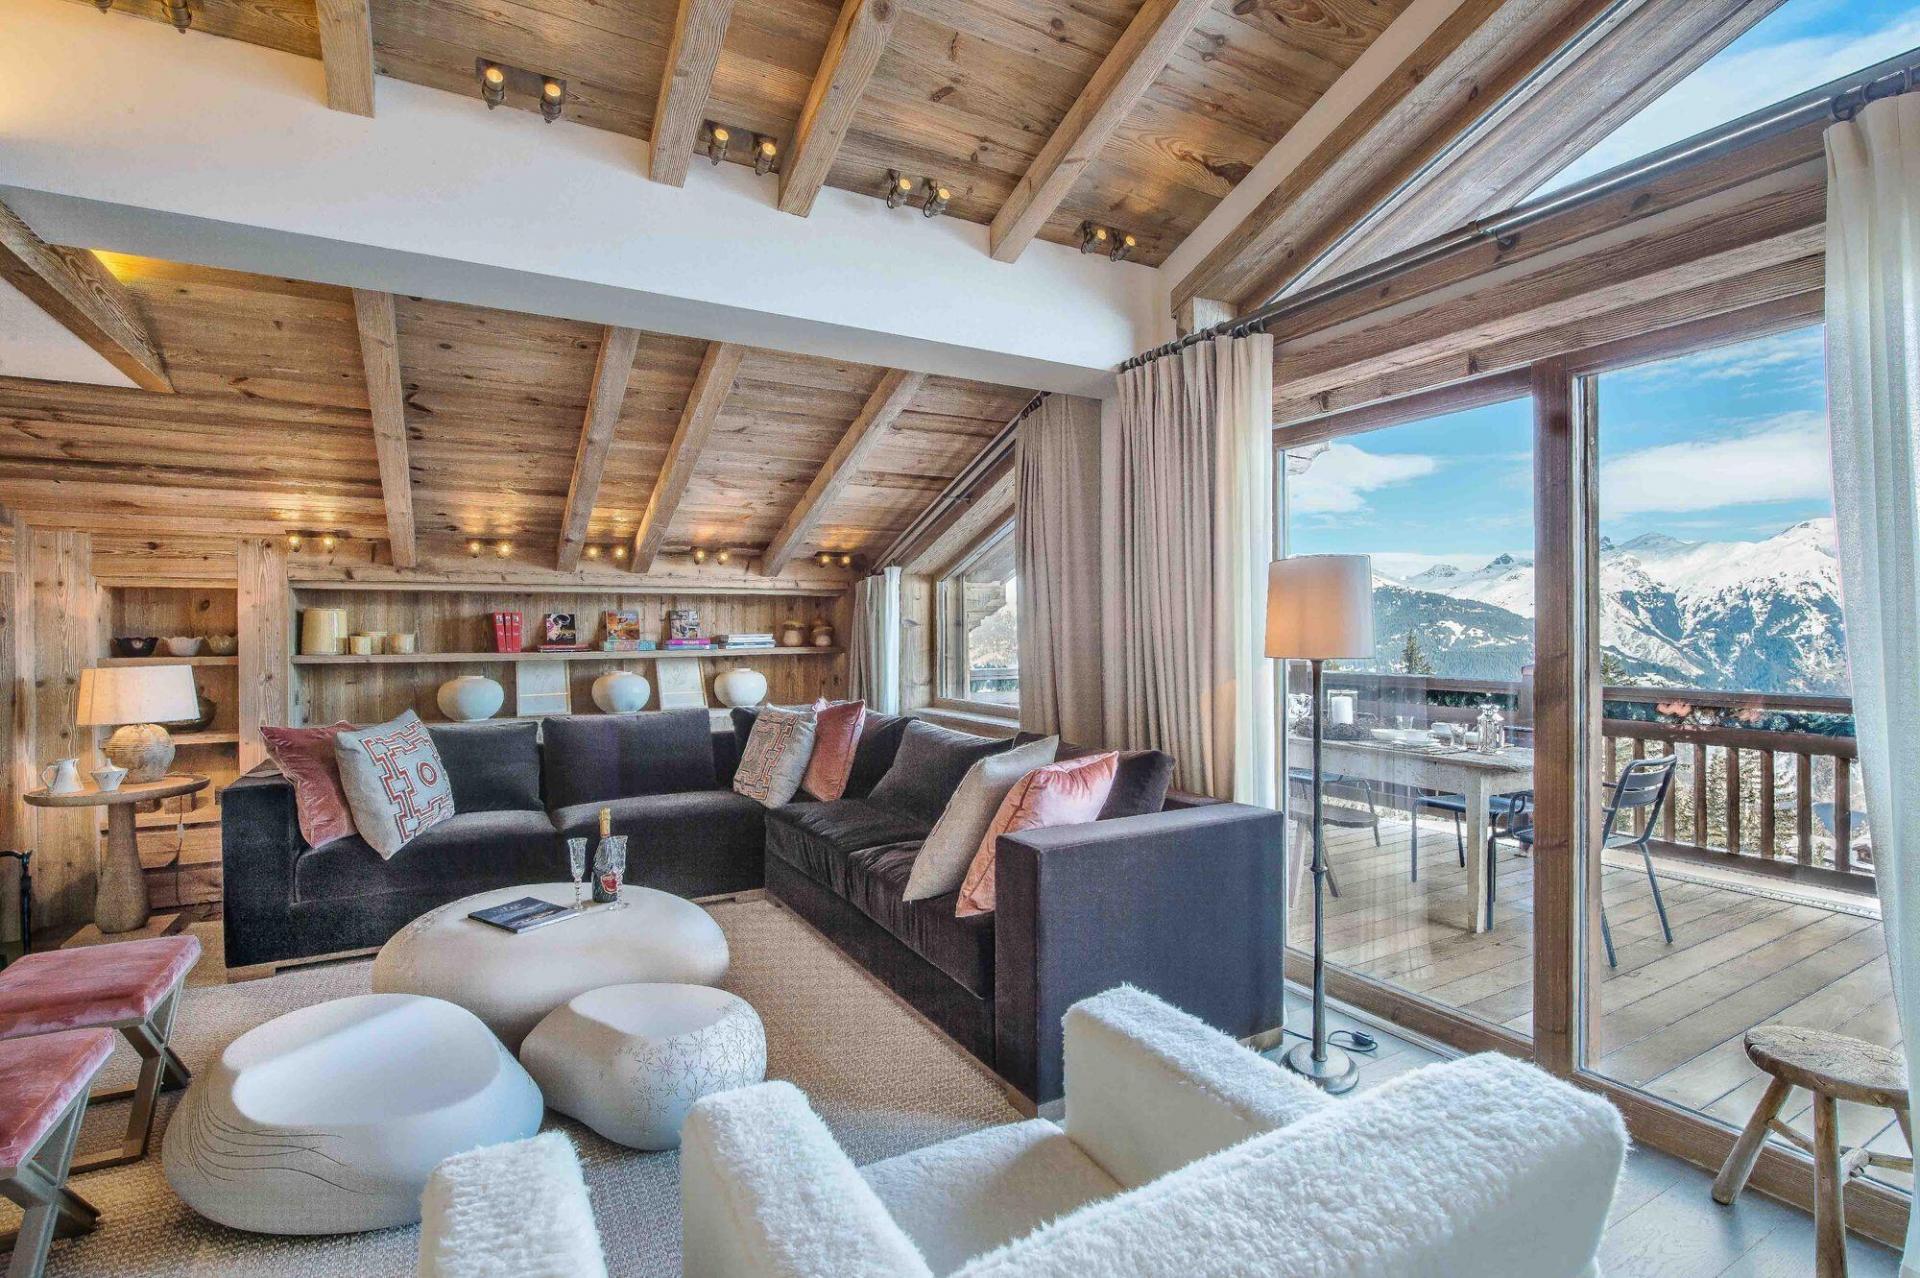 A BEAUTIFUL LUXURY CHALET TO RENT  IN COURCHEVEL FOR YOUR HOLIDAY